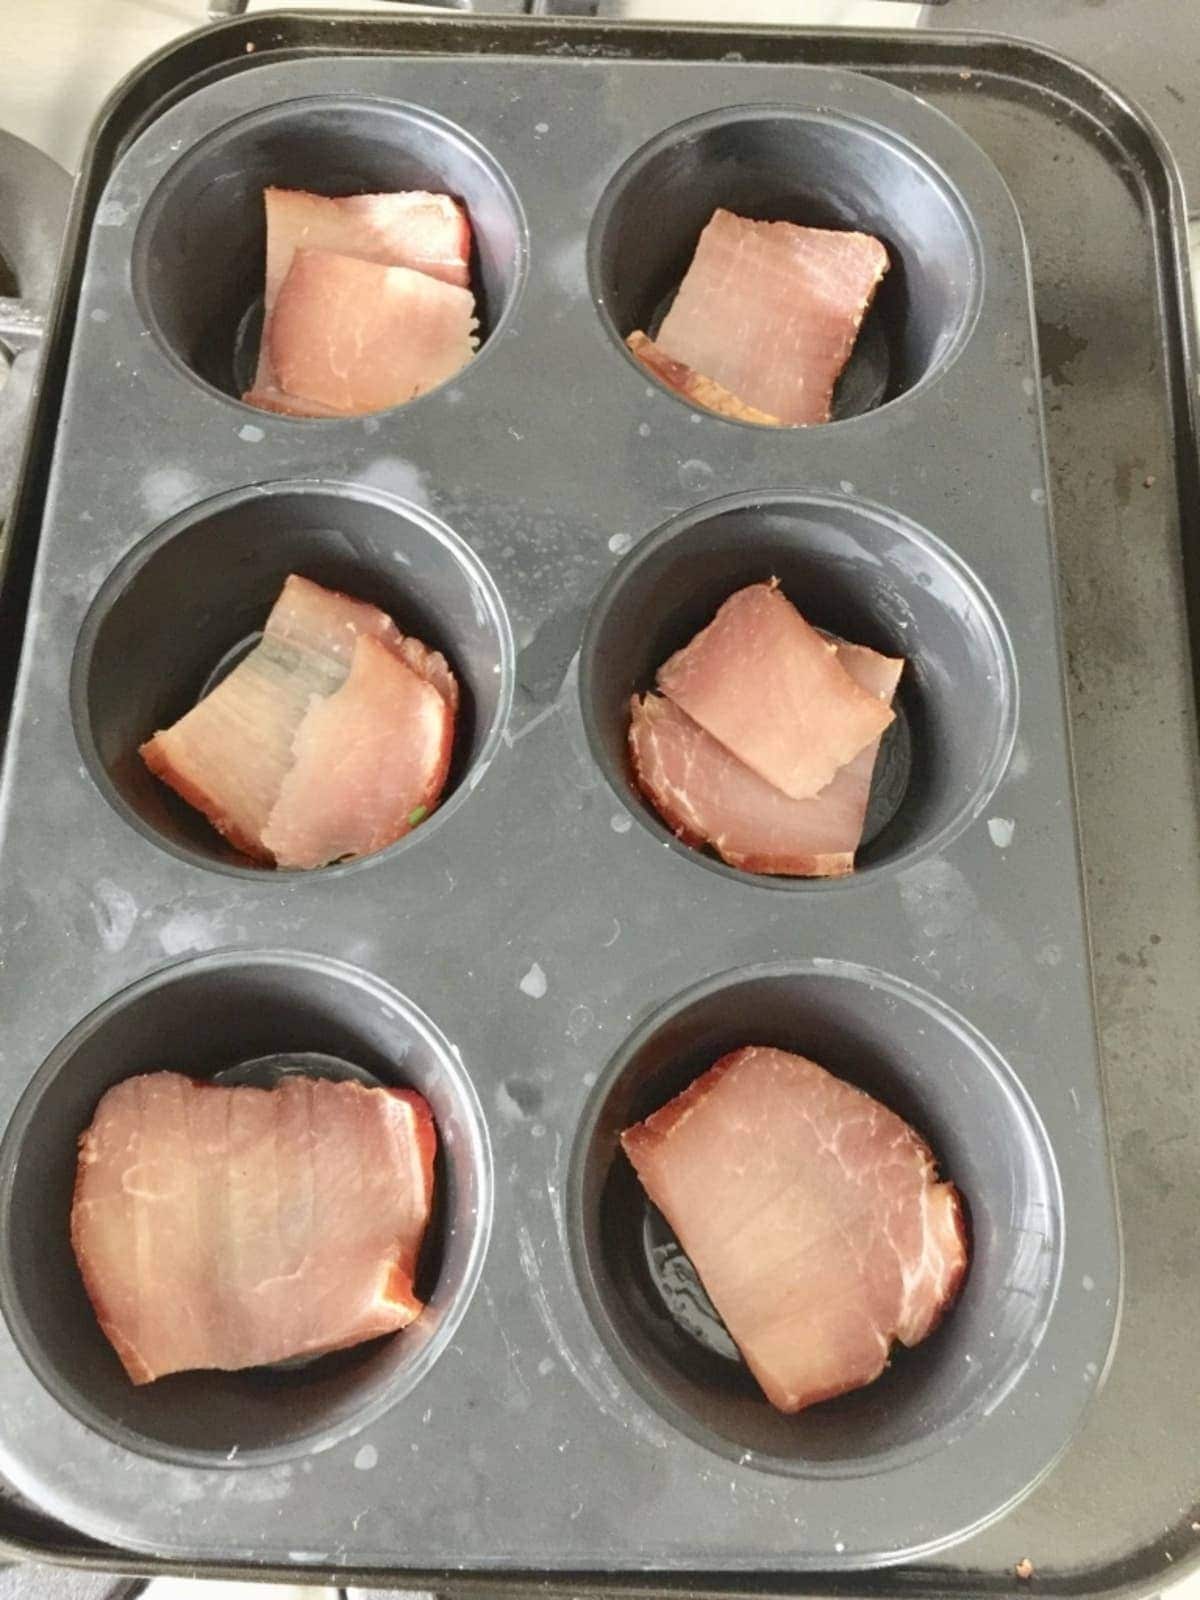 Slices of ham in a muffin tin.